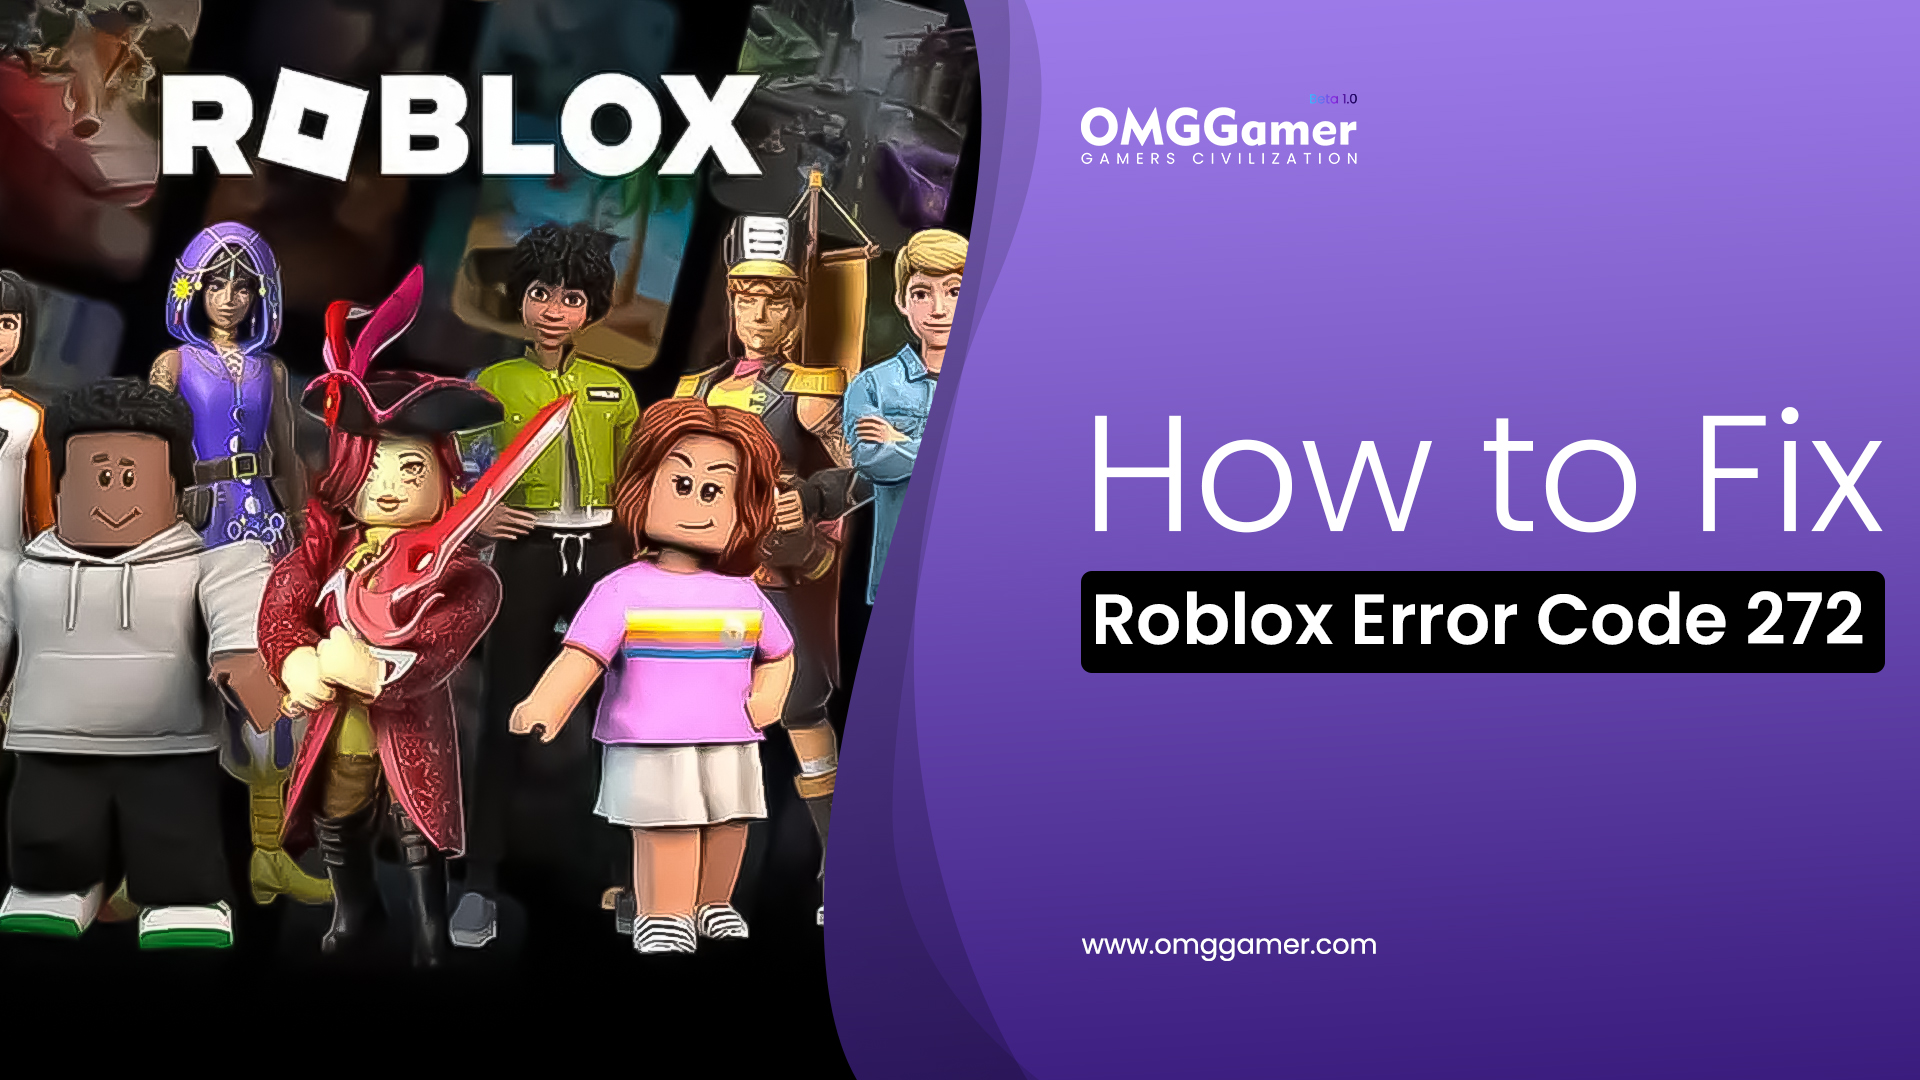 [SOLVED] How to Fix Roblox Error Code 272